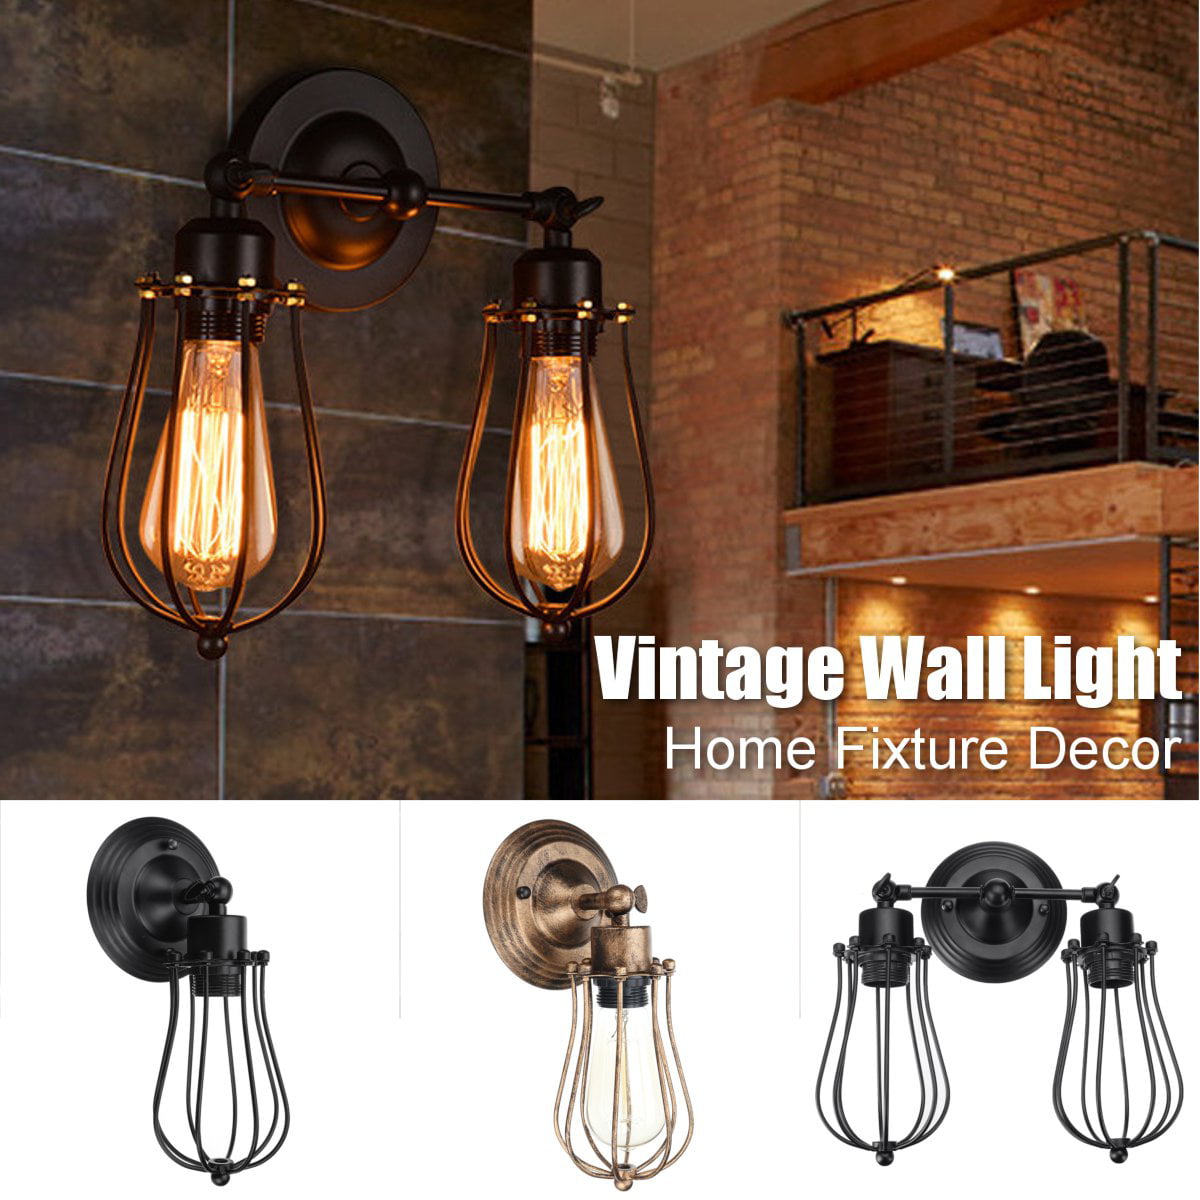 E27 Retro Vintage Industrial Metal Cage Wall Mounted Lamp Rustic Sconce Light 